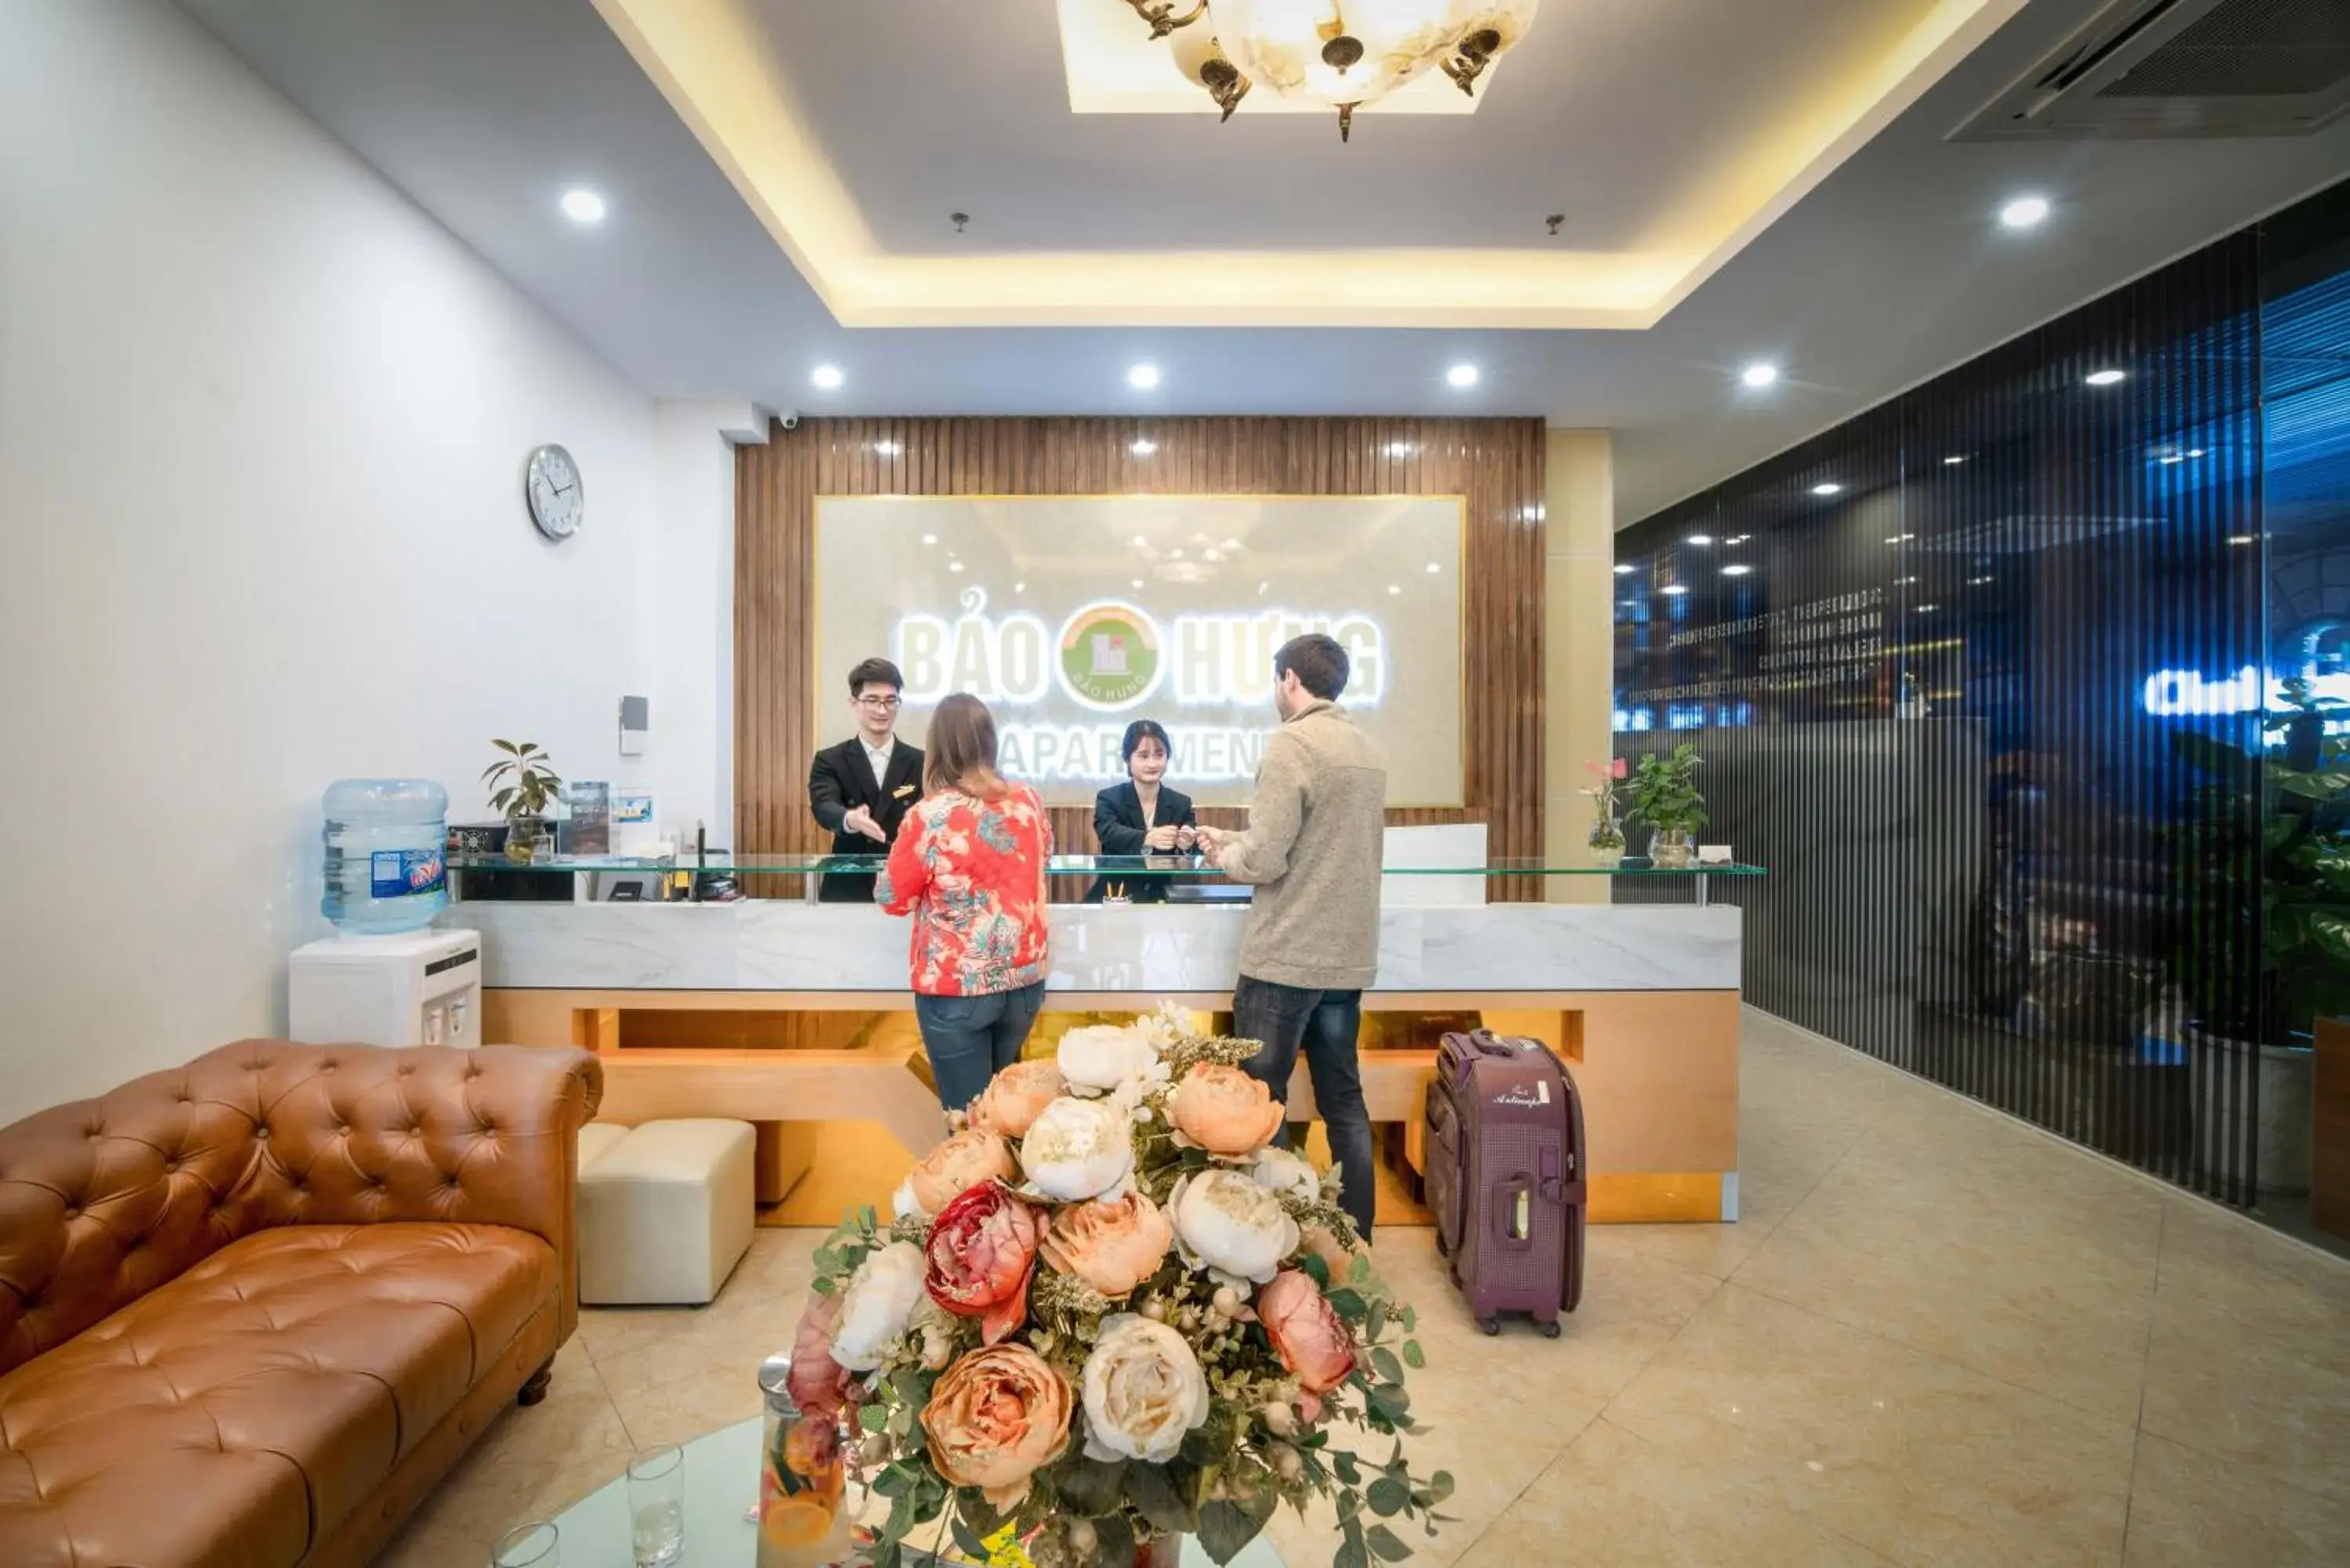 Lobby or reception in Bao Hung Hotel and Apartment